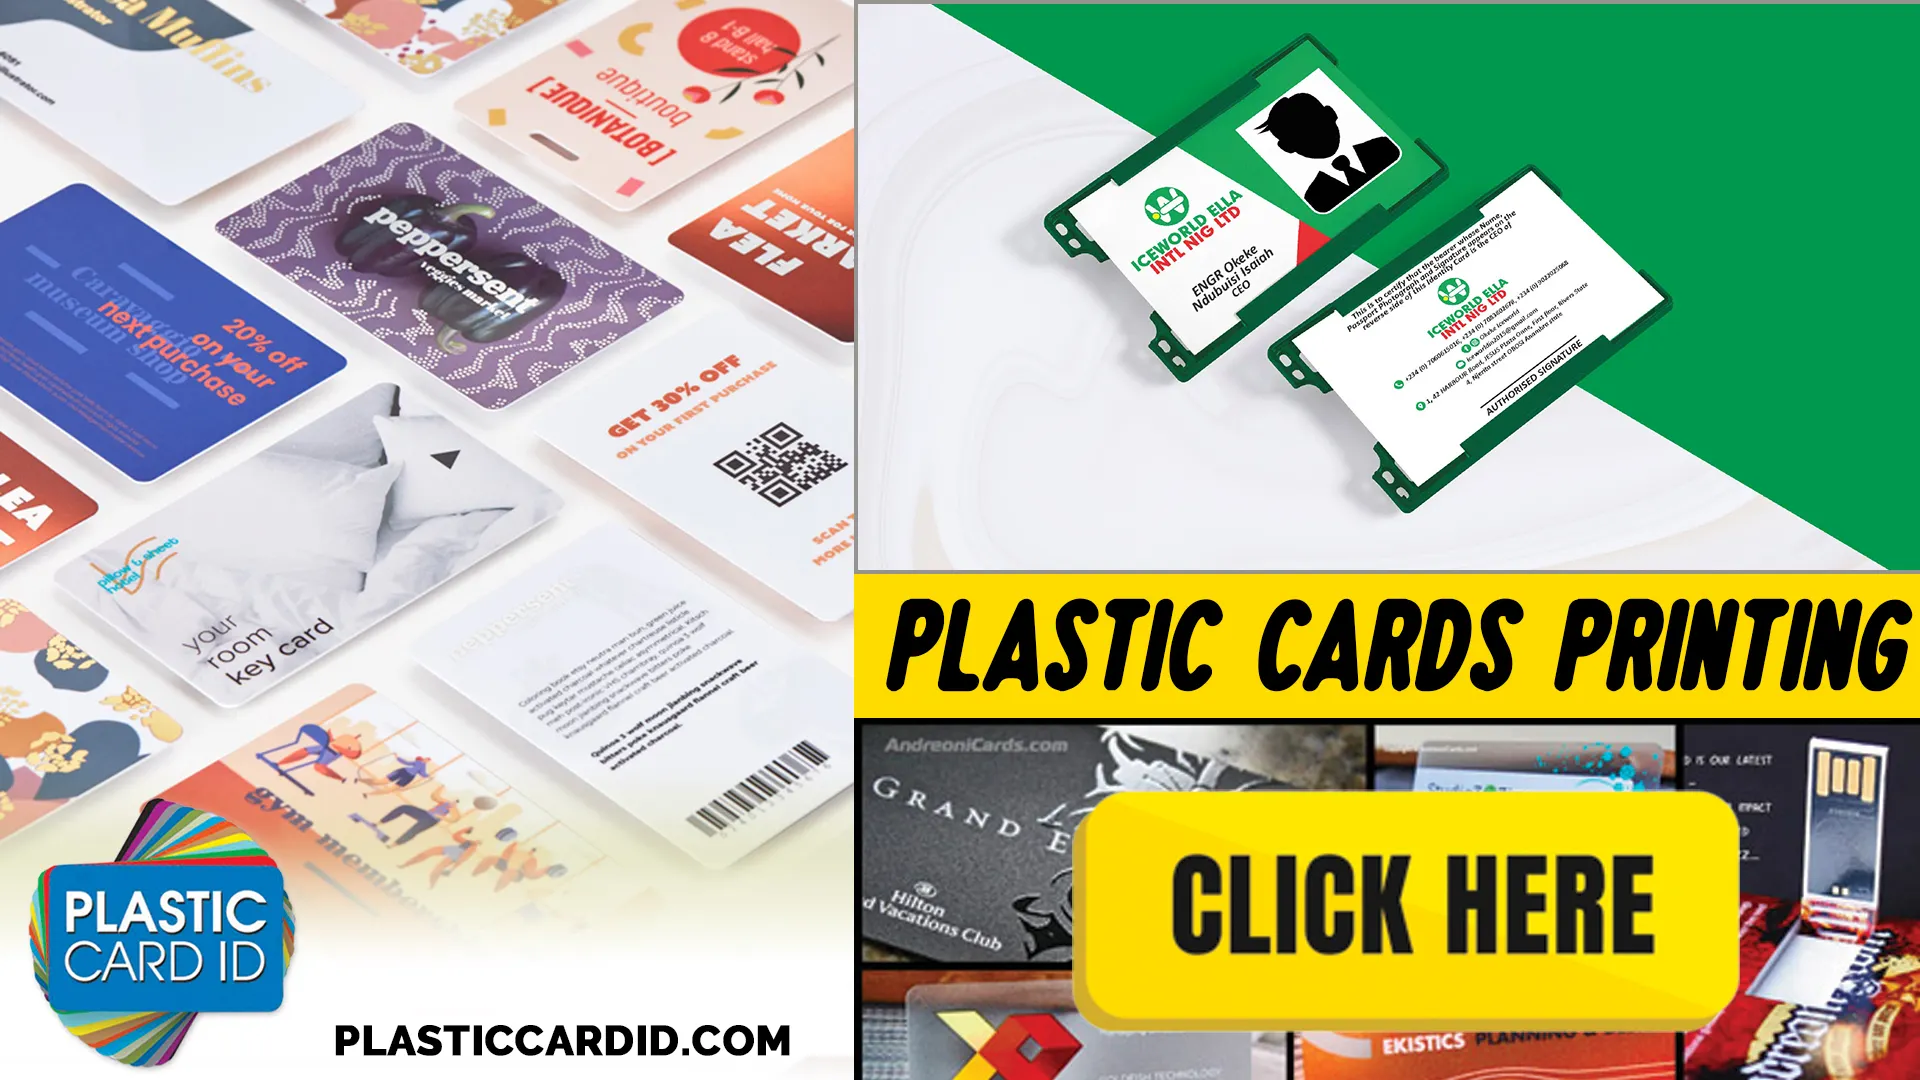 Adding Personalized Features to Your Plastic Cards